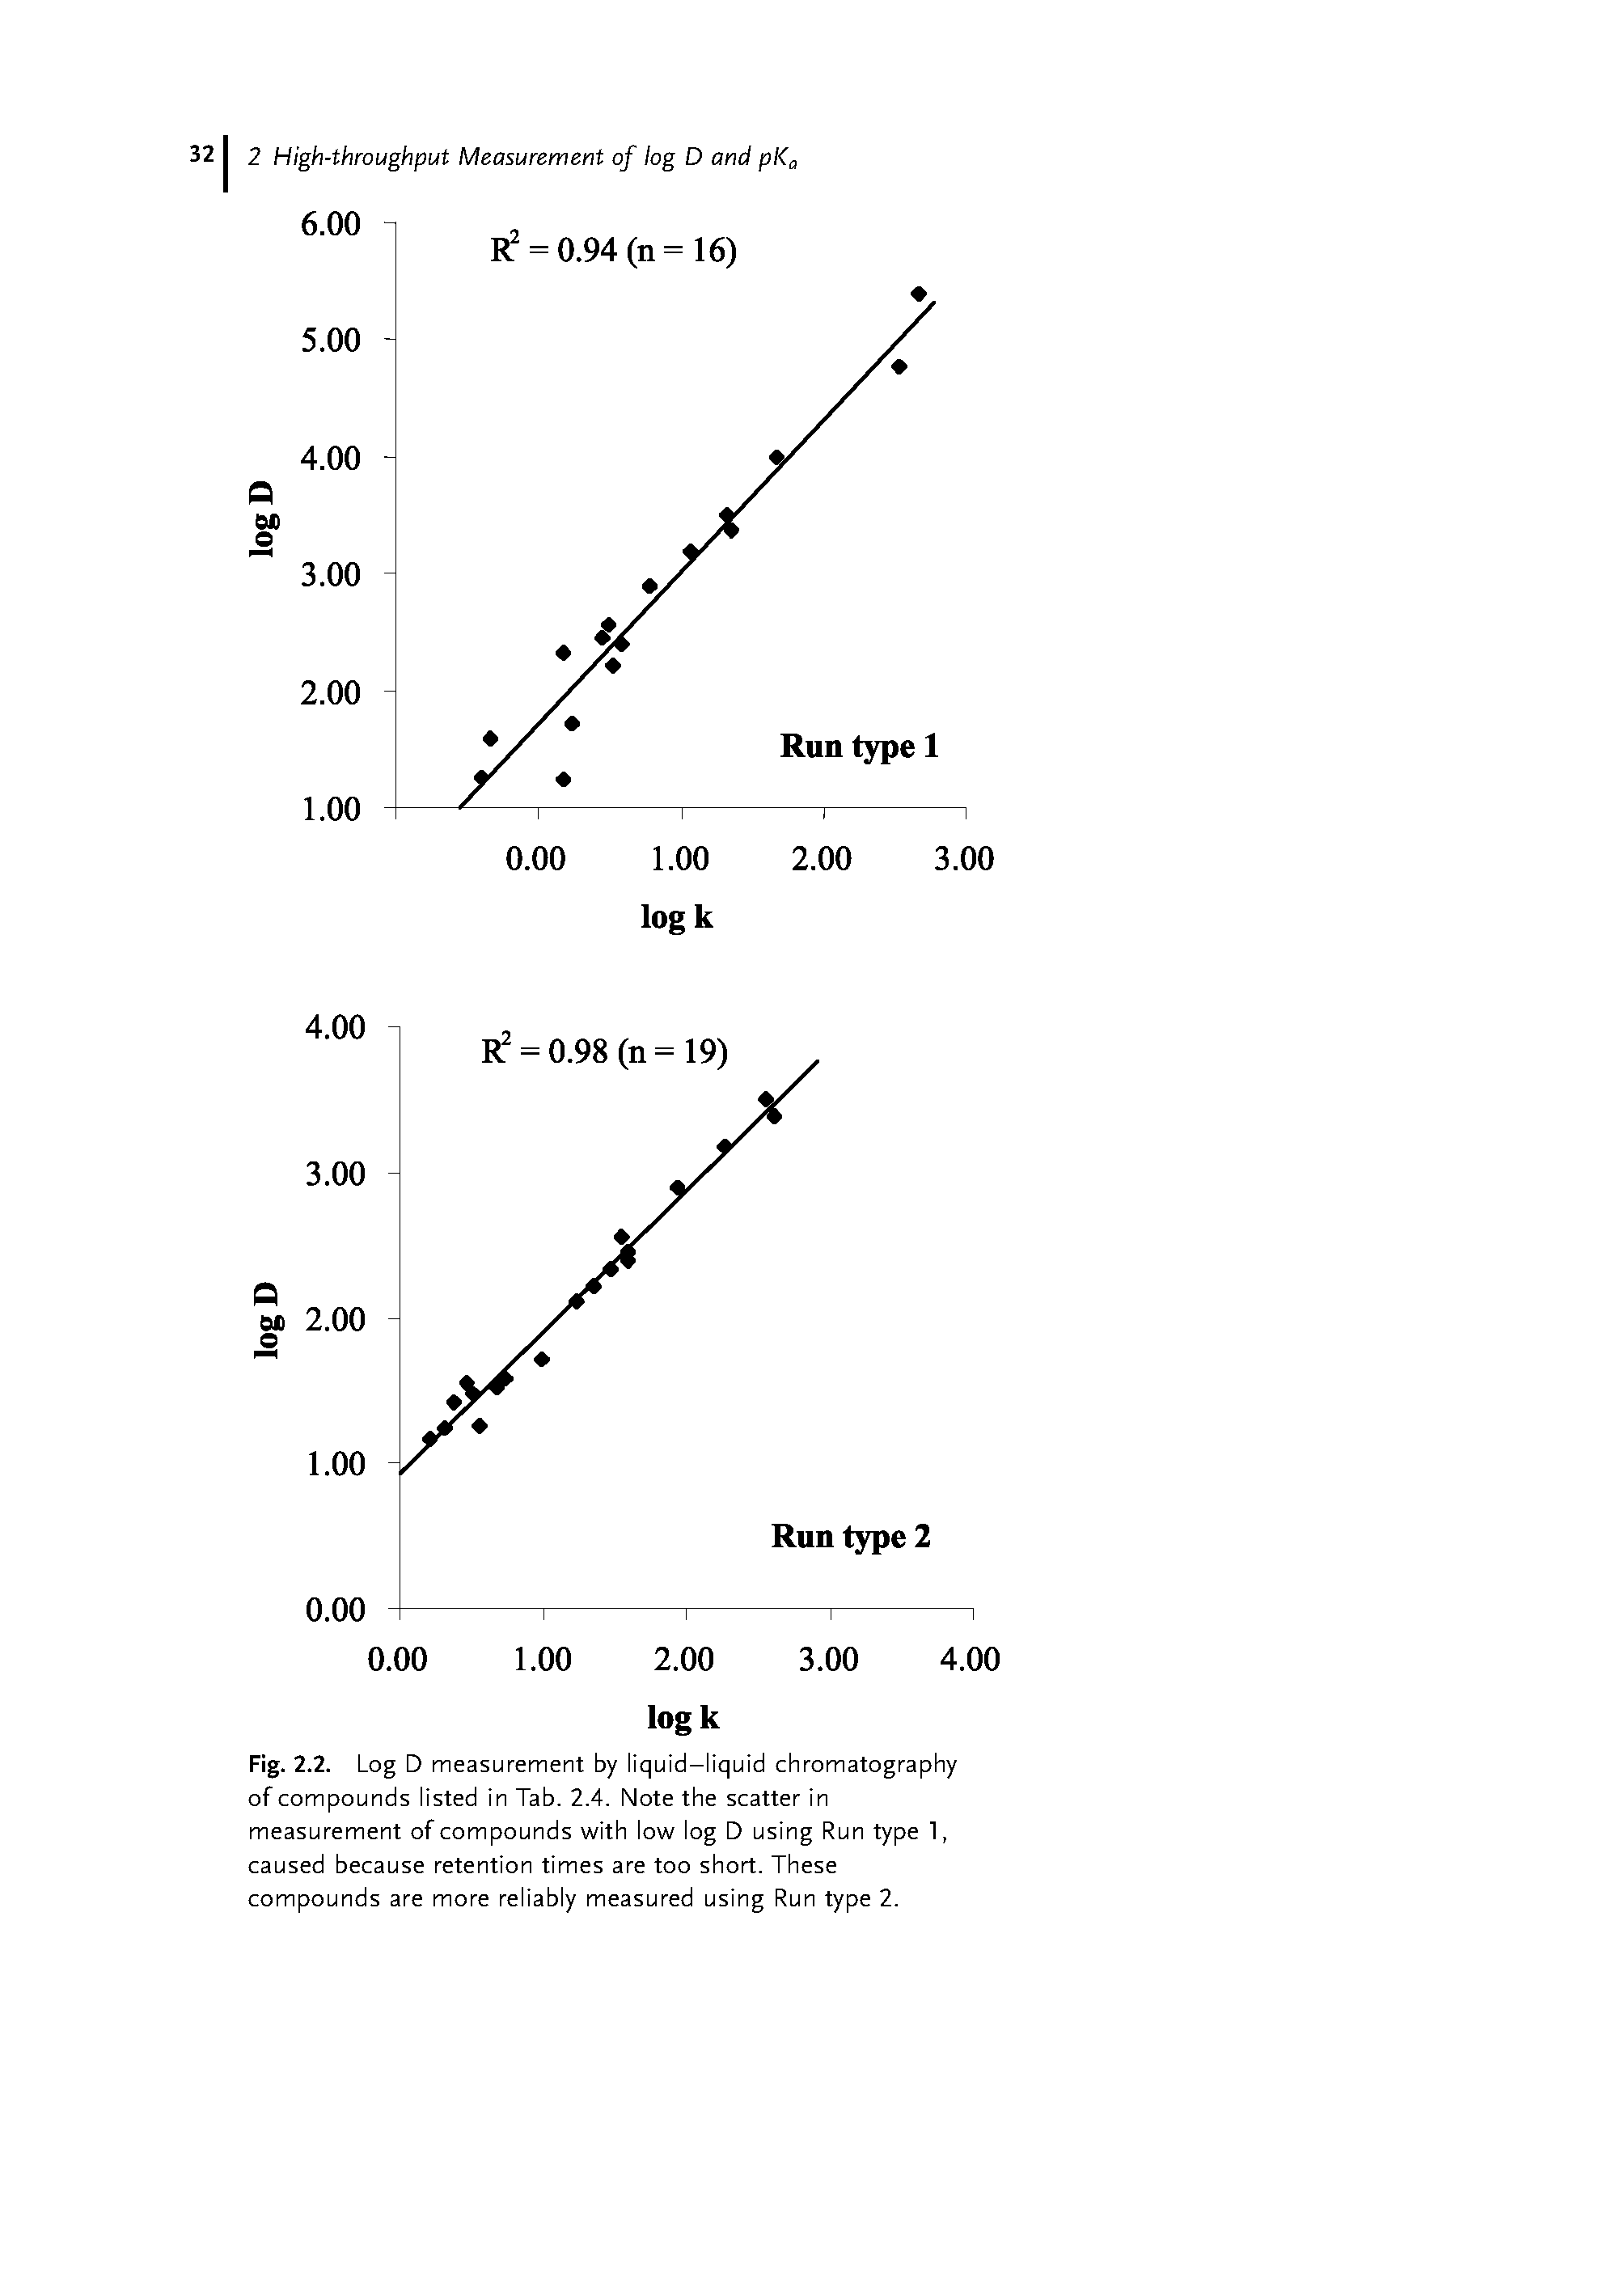 Fig. 2.2. Log D measurement by liquid-liquid chromatography of compounds listed in Tab. 2.4. Note the scatter in measurement of compounds with low log D using Run type 1, caused because retention times are too short. These compounds are more reliably measured using Run type 2.